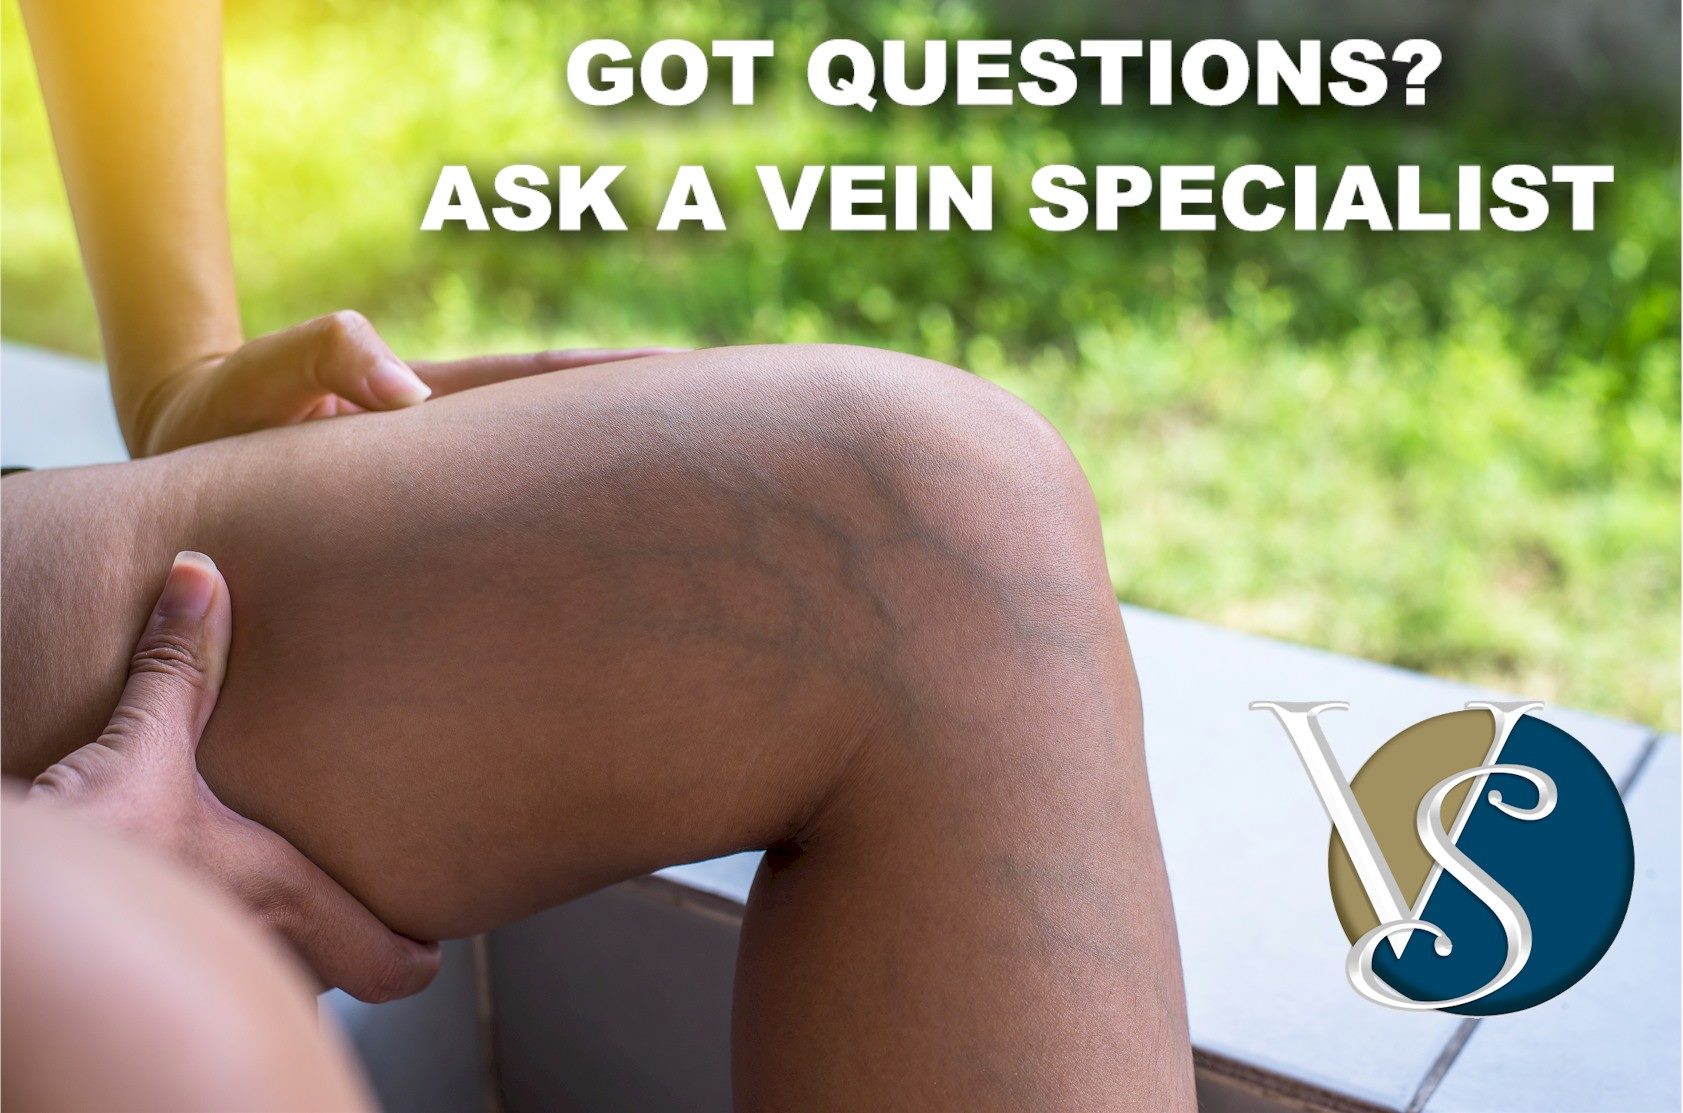 ASK A VEIN SPECIALIST: Got Questions For Dr. Draughn?